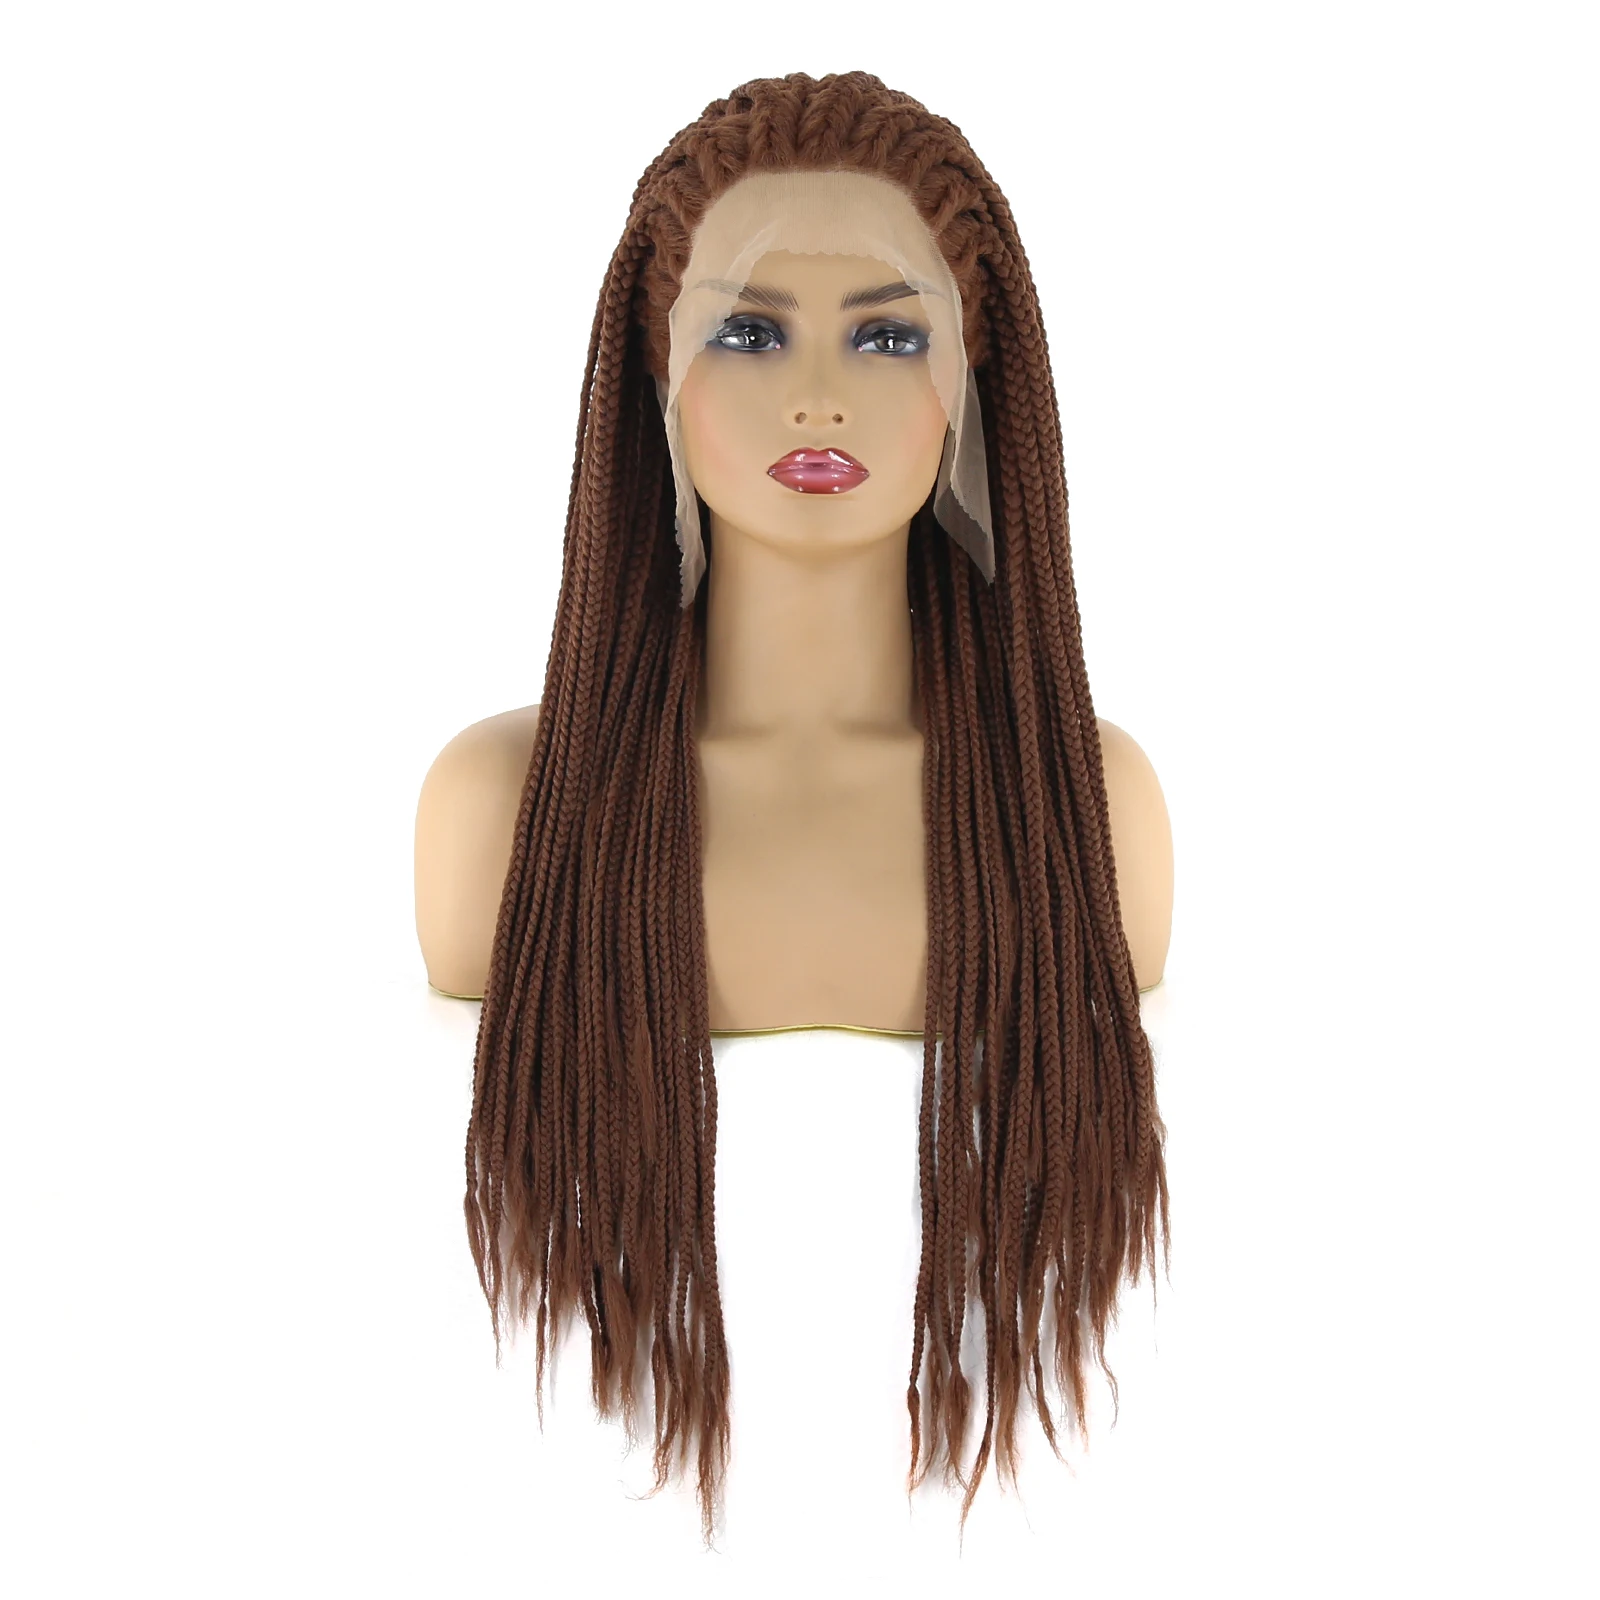 BTWTRY Brown Braided Wig Synthetic Lace Front Wigs Handmade Yaki Hair Braids Slit Parting Braids Hair Box Braid Wig for Women